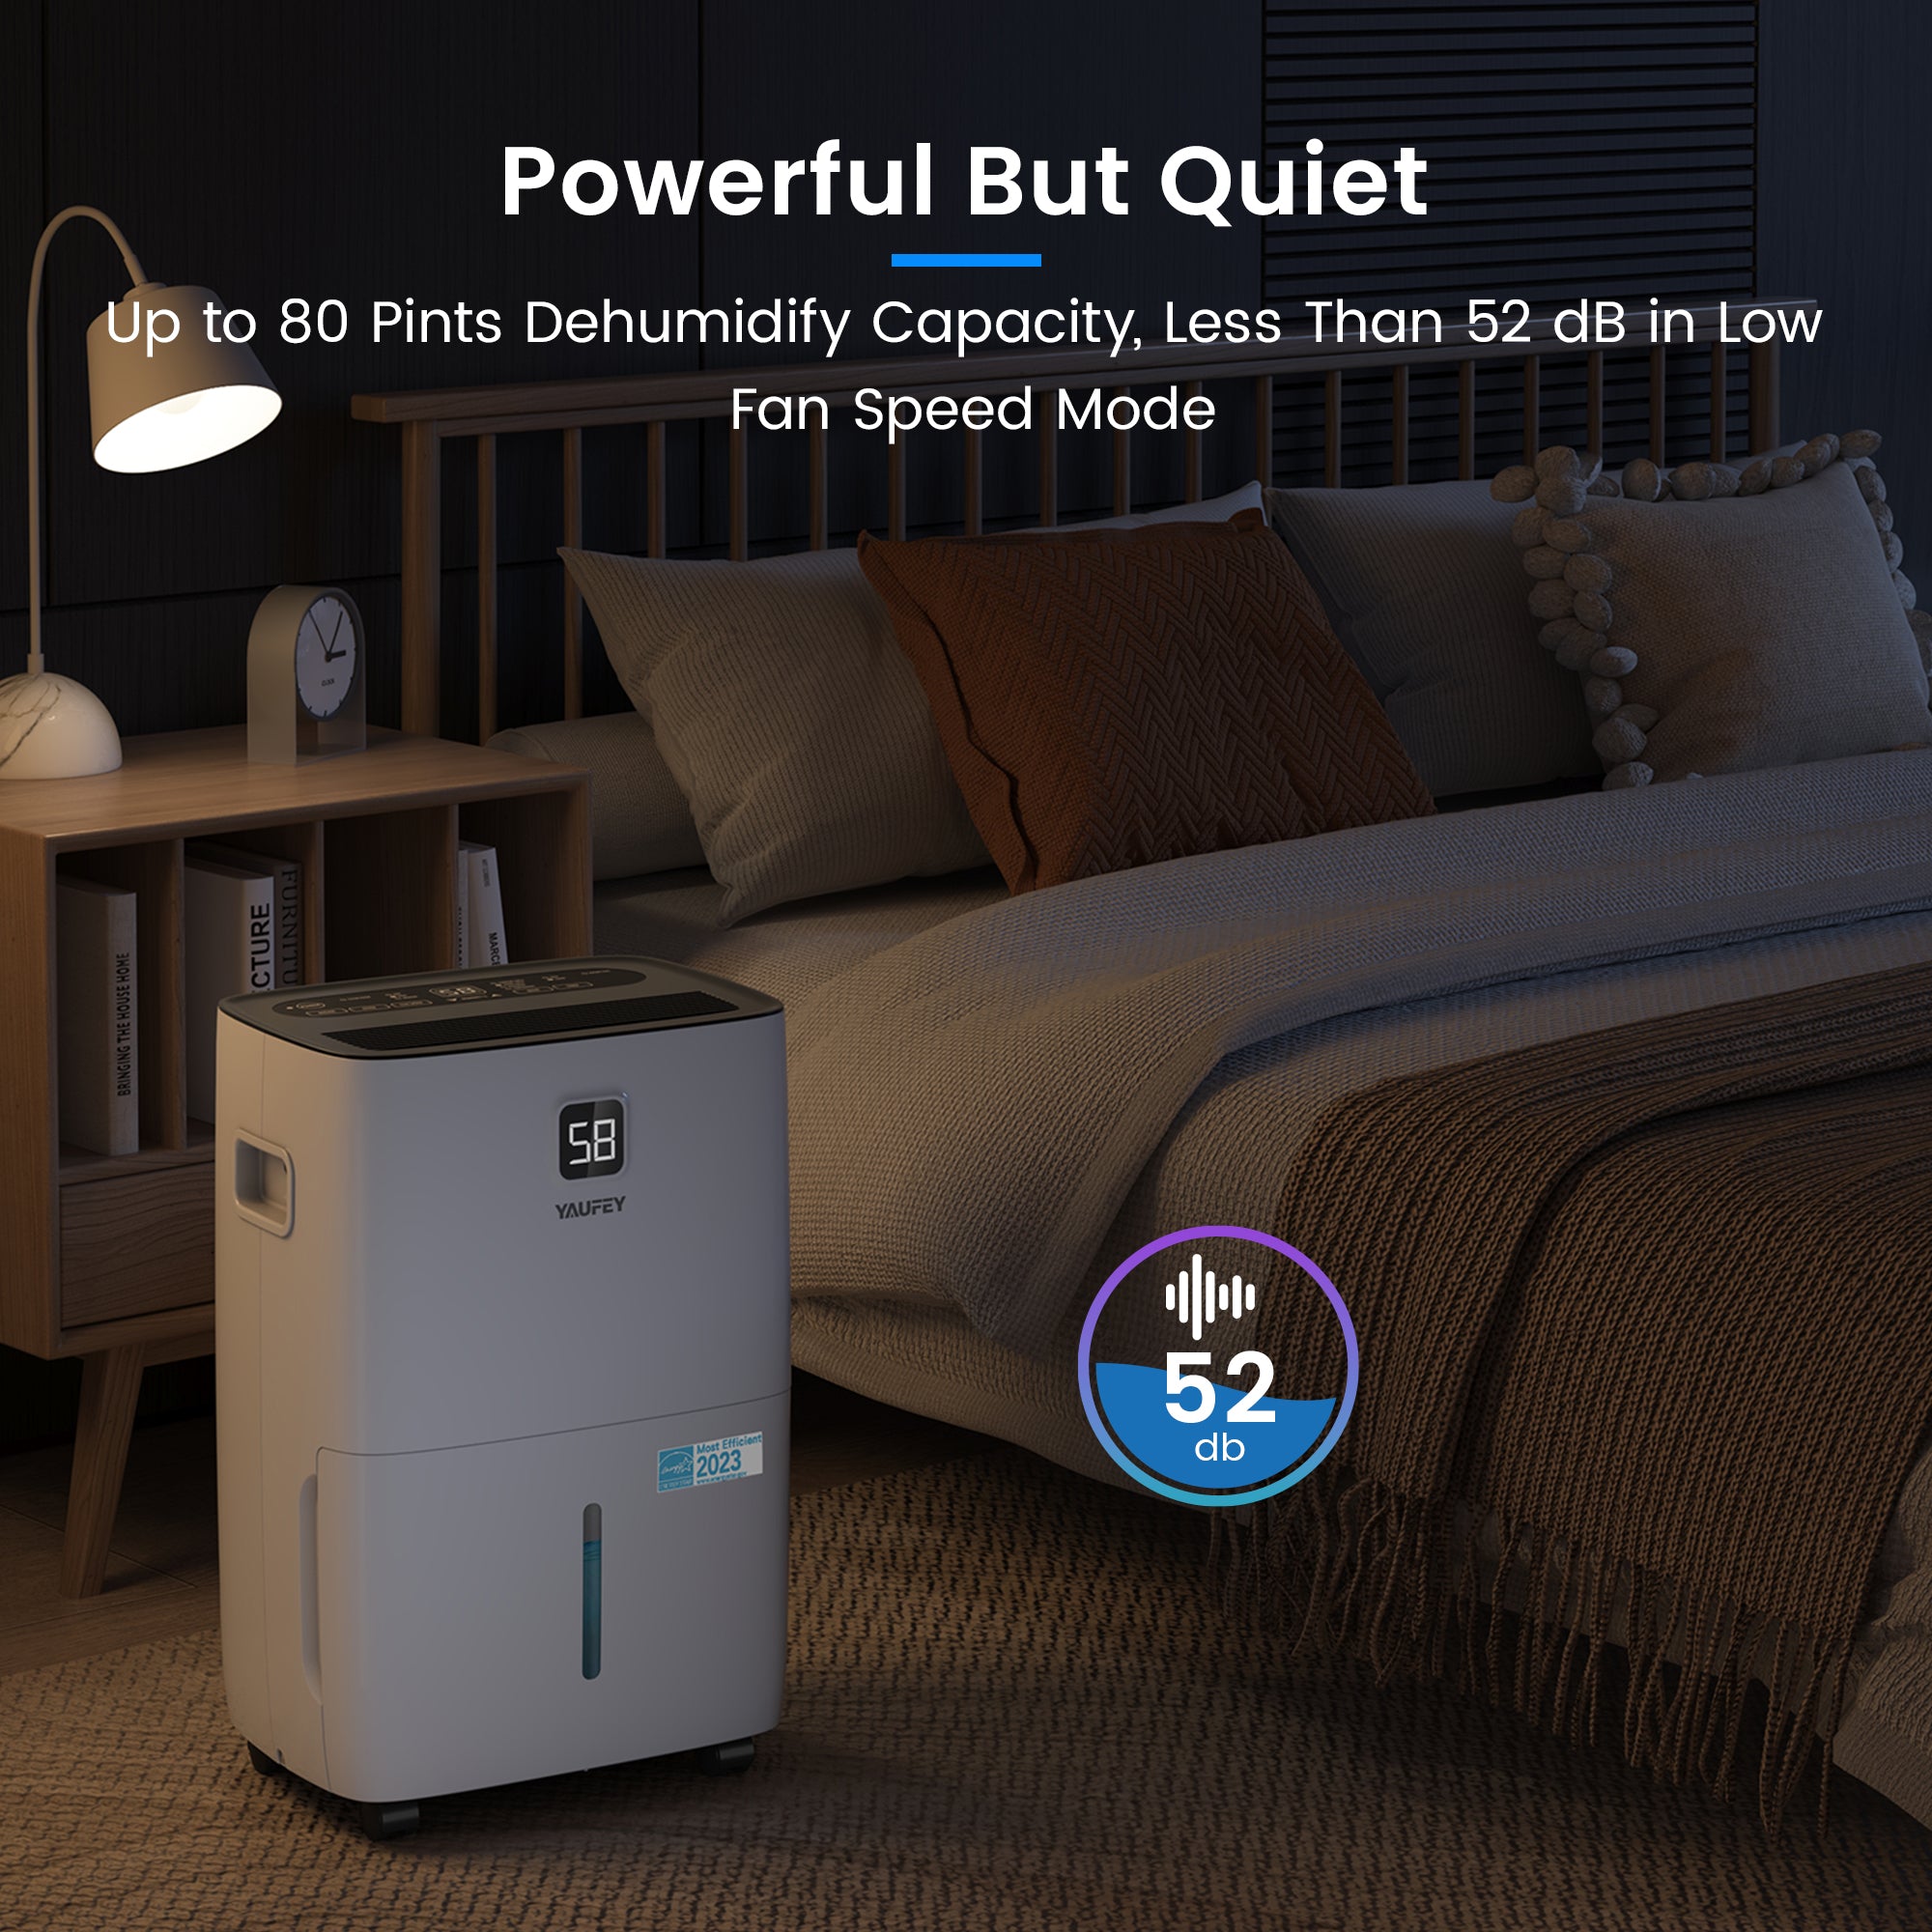 Yaufey 80-Pint Energy Star Dehumidifier for Home, Basement and Large Rooms up to 5000 Sq. Ft, Powerful and Quiet, with Timer, Intelligent Humidity Control, Drain Hose and Large Water Tank(Model: JD025Q-80)